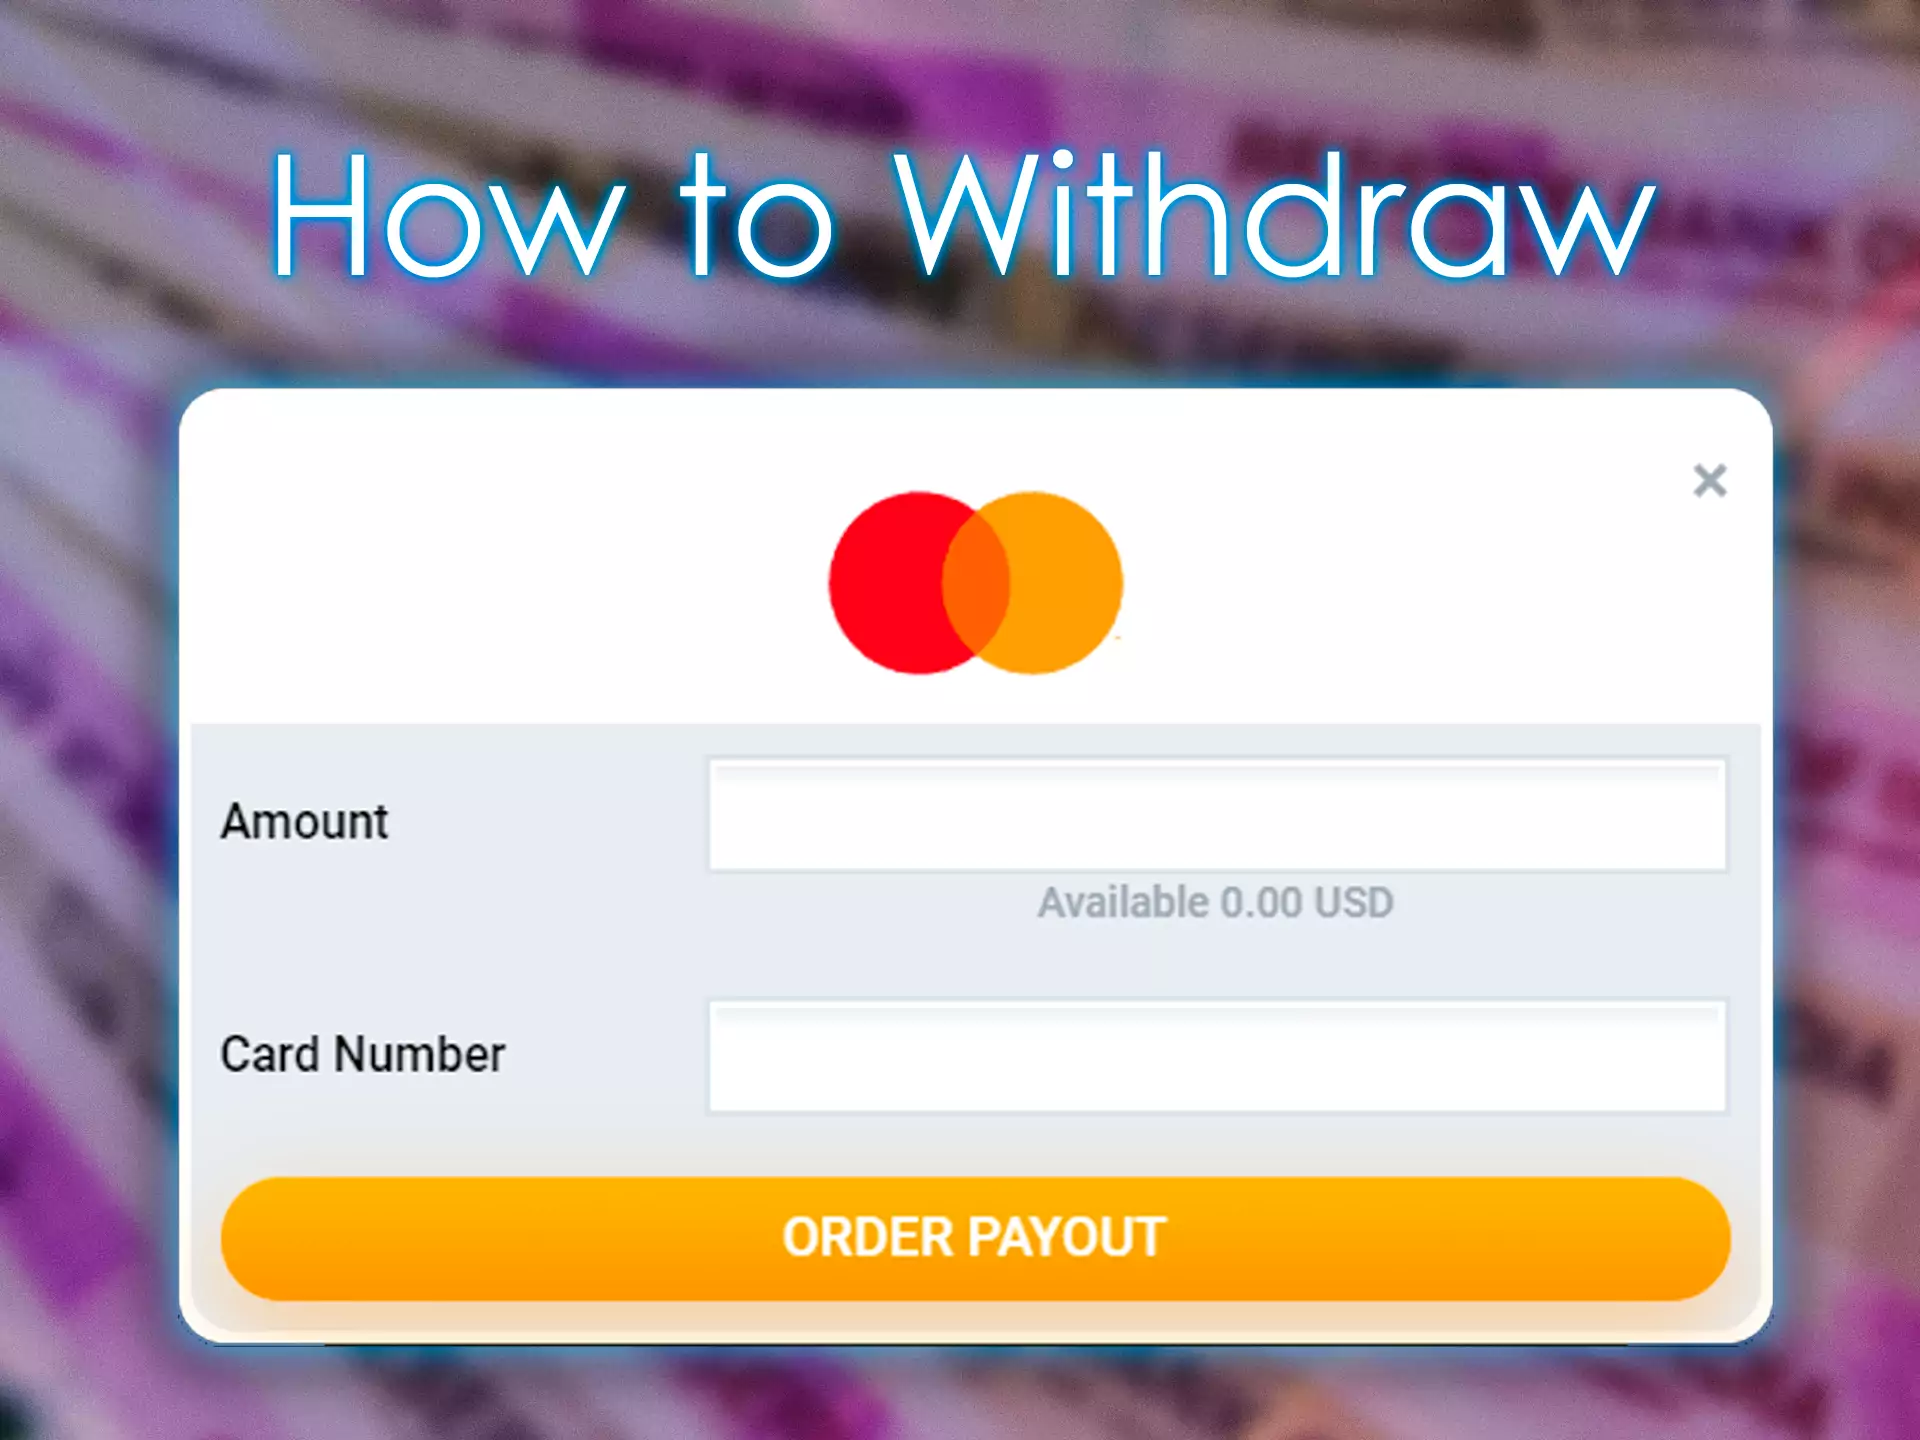 You can withdraw funds to any available payment card or e-wallet.